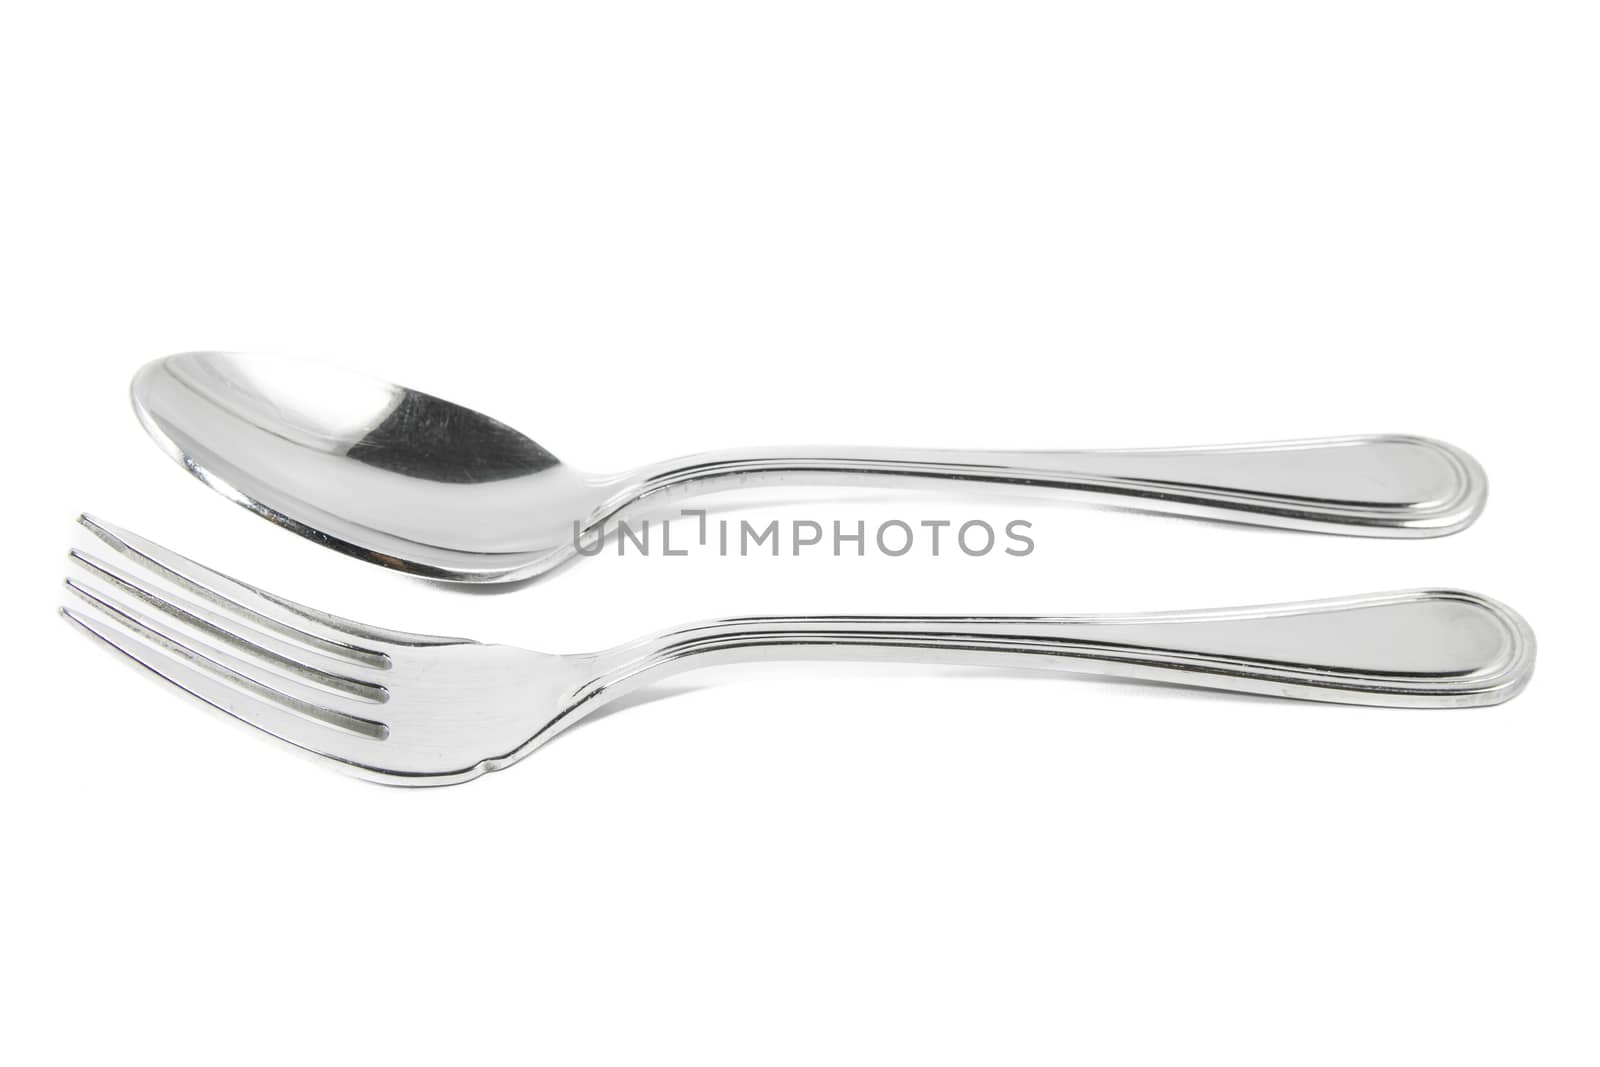 Spoon and fork isolated on white background by kasinv